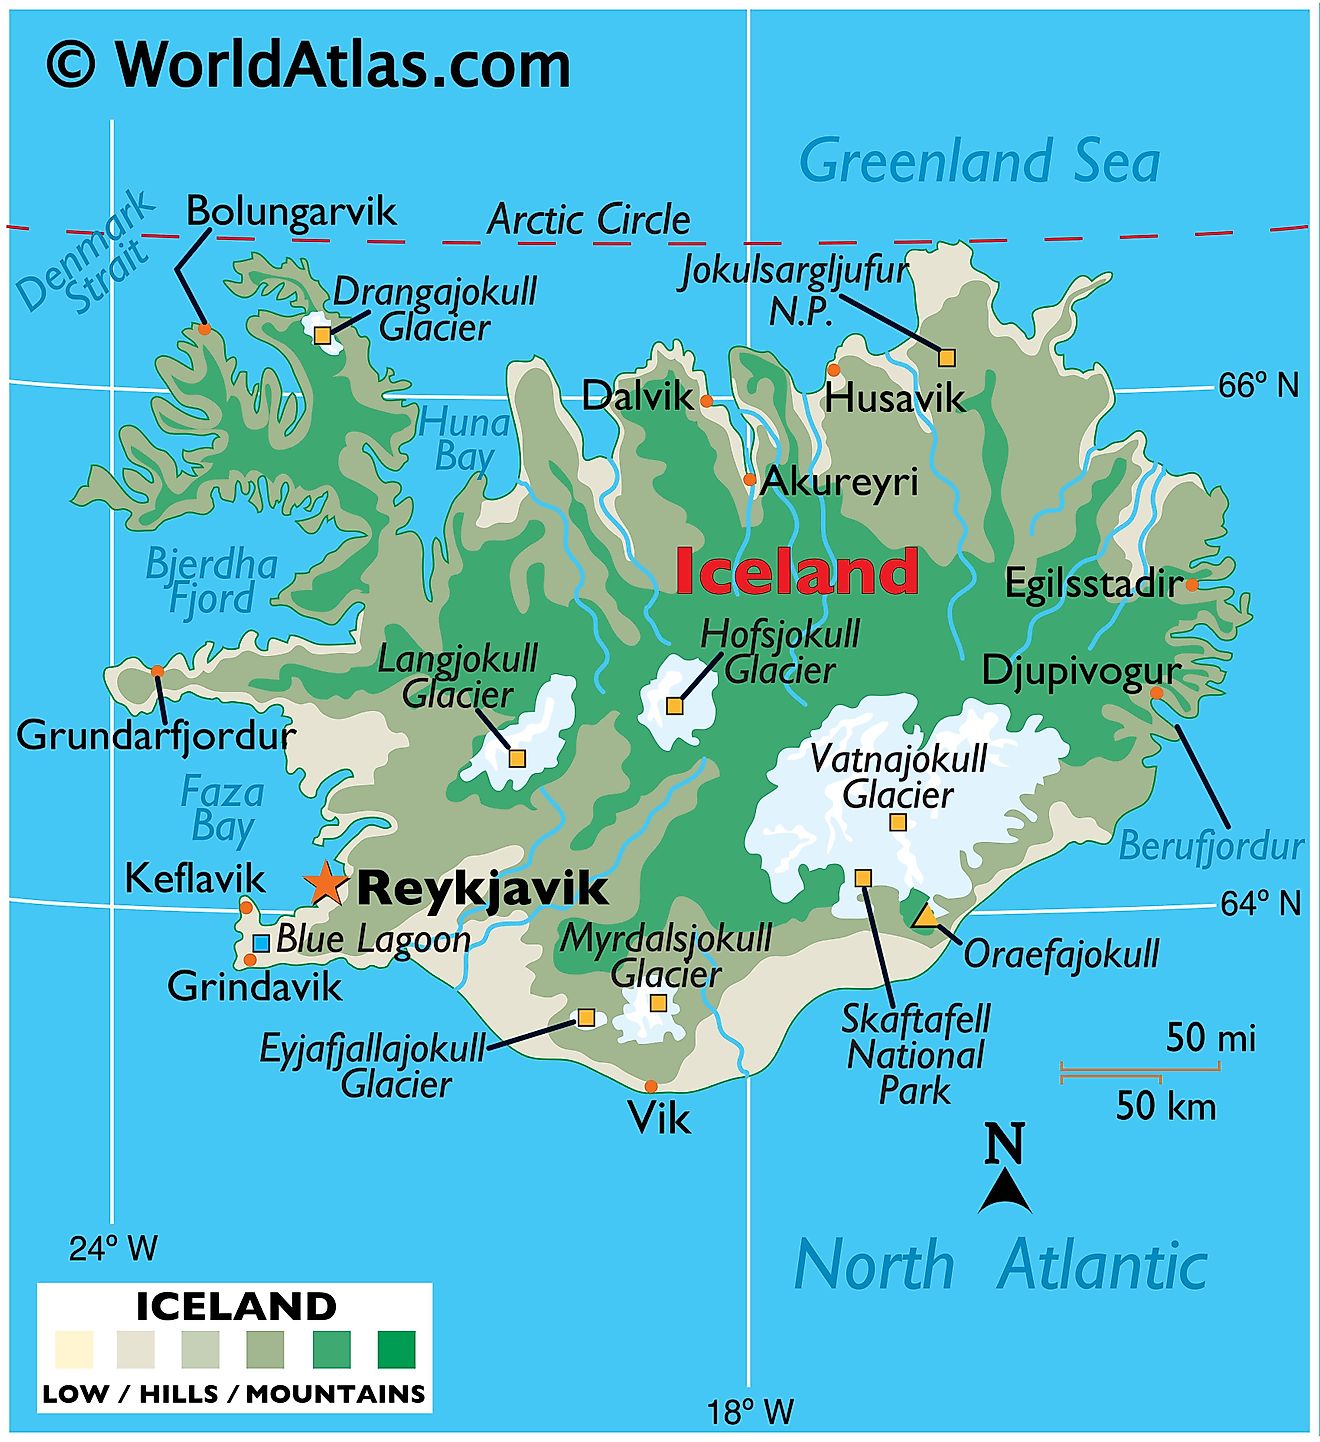 Physical Map of Iceland showing terrain, mountains, extreme points, glaciers, fjords, bays, etc.